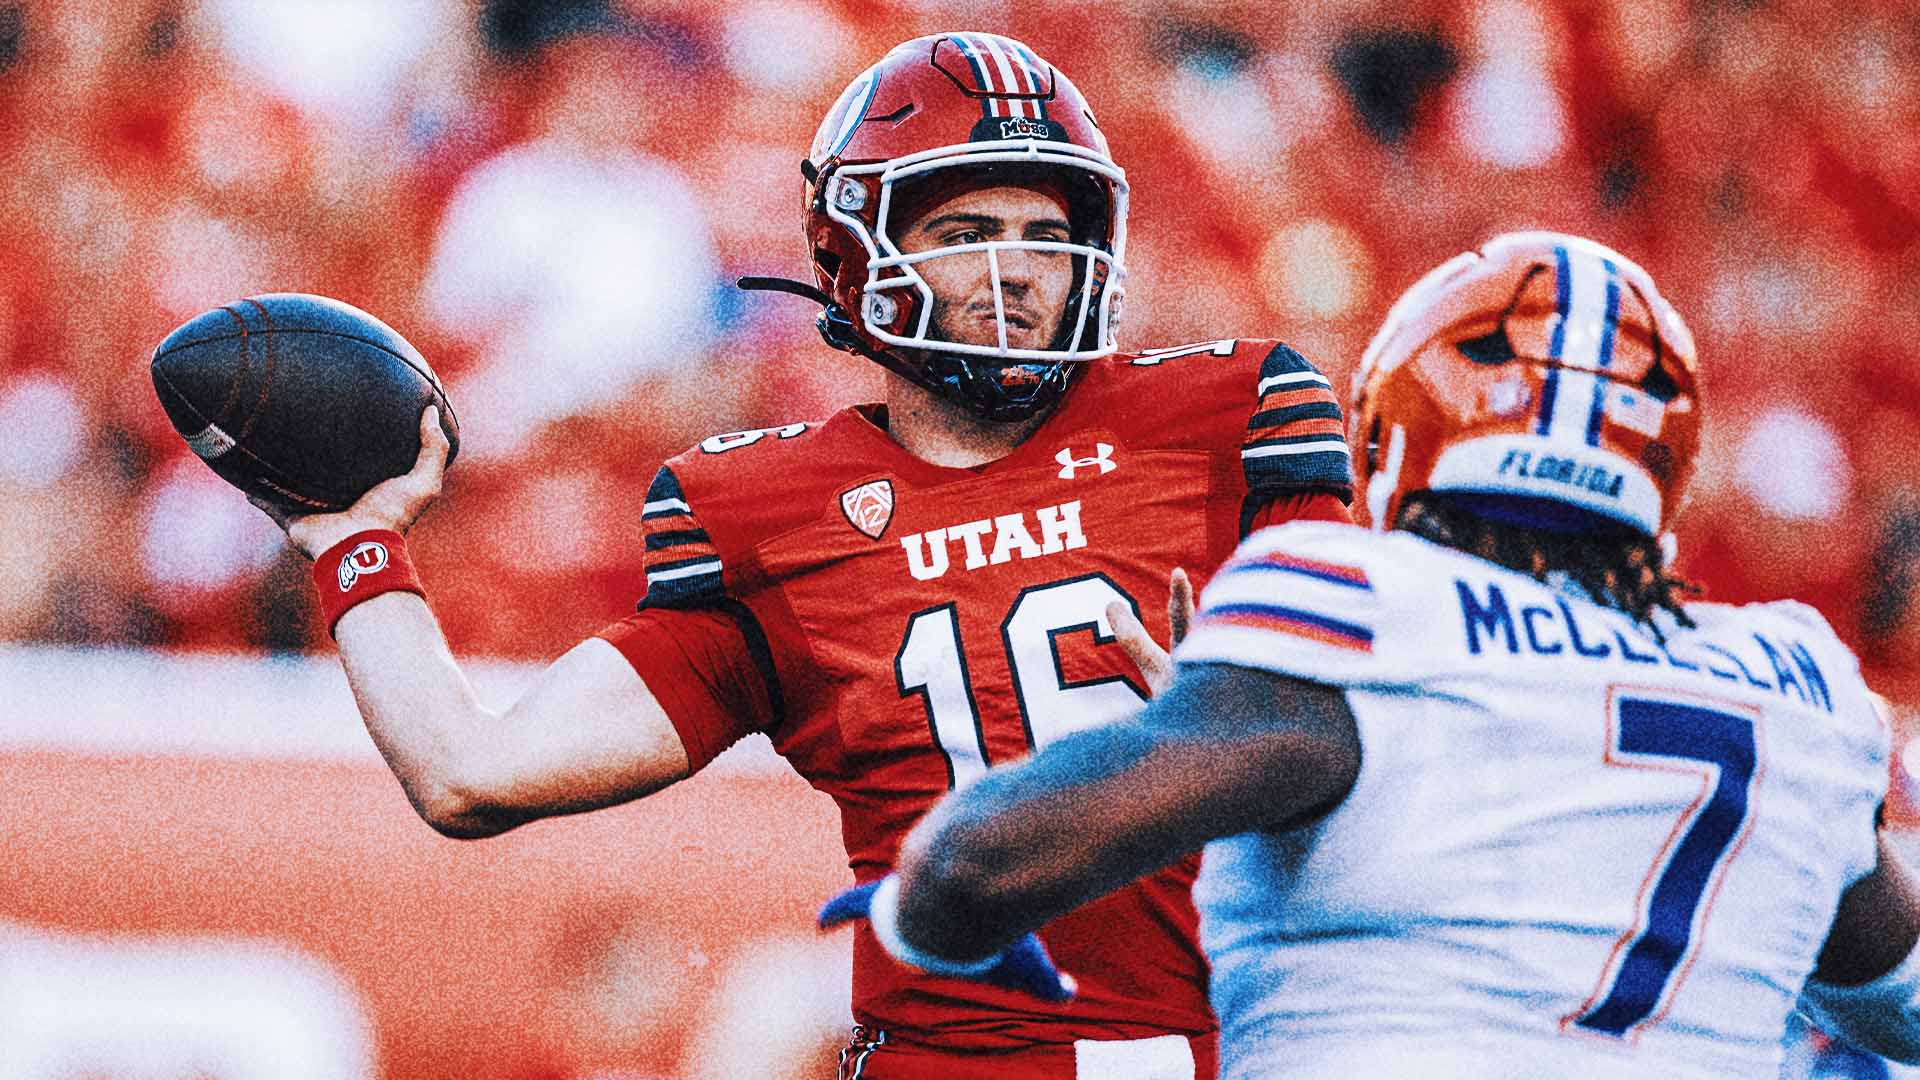 Look out Pac-12: No. 14 Utah dominates Florida even without Cam Rising